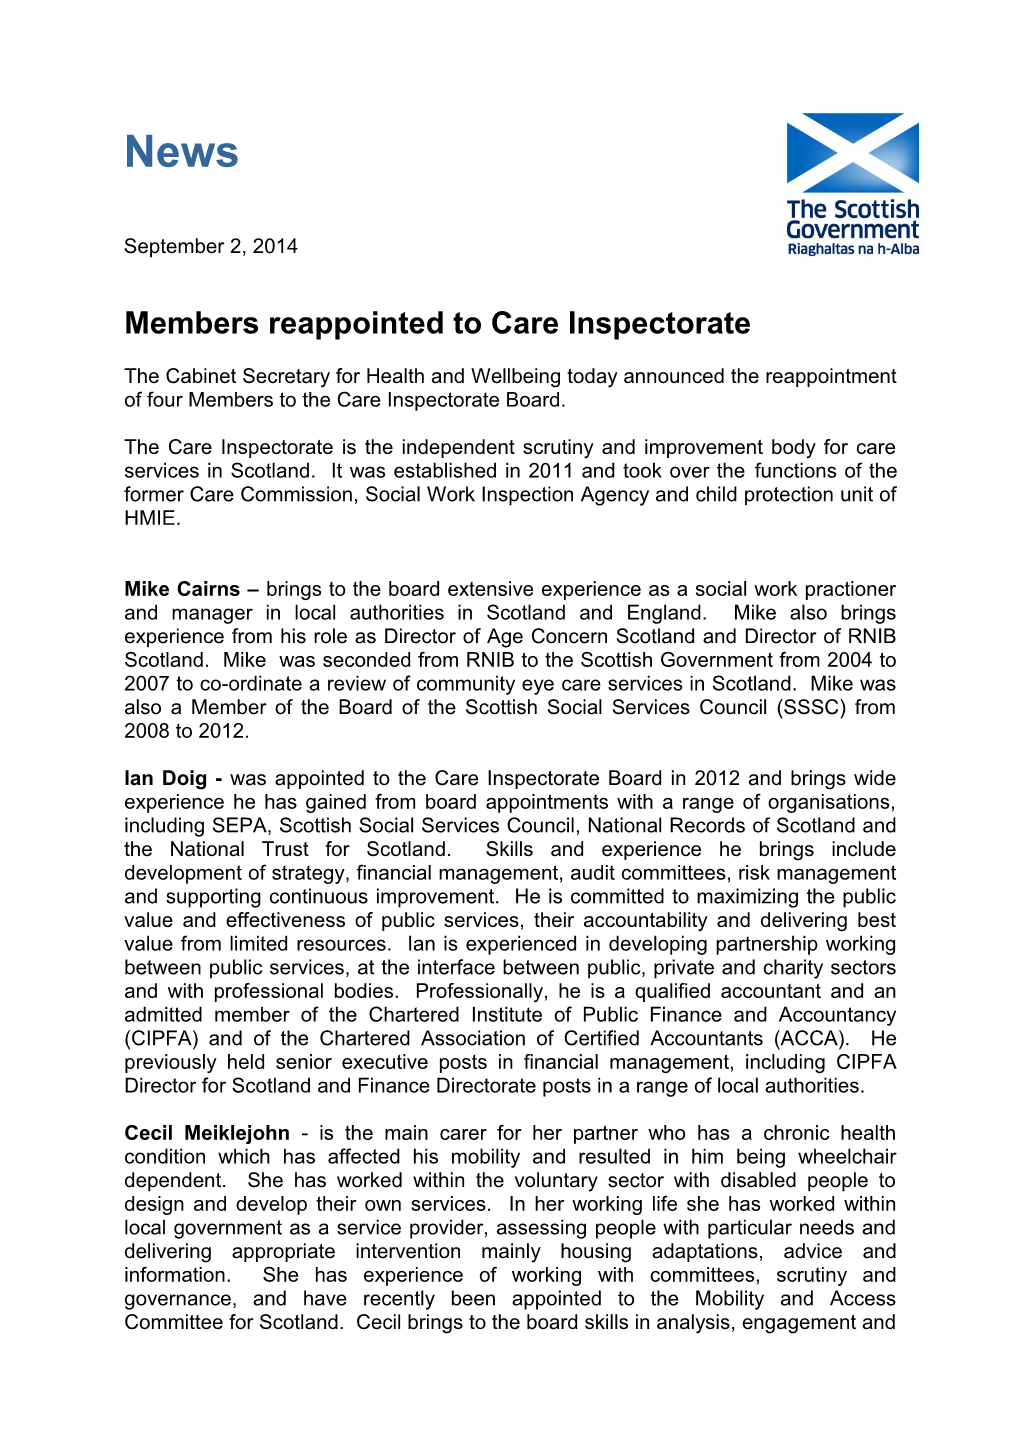 Members Reappointed to Care Inspectorate